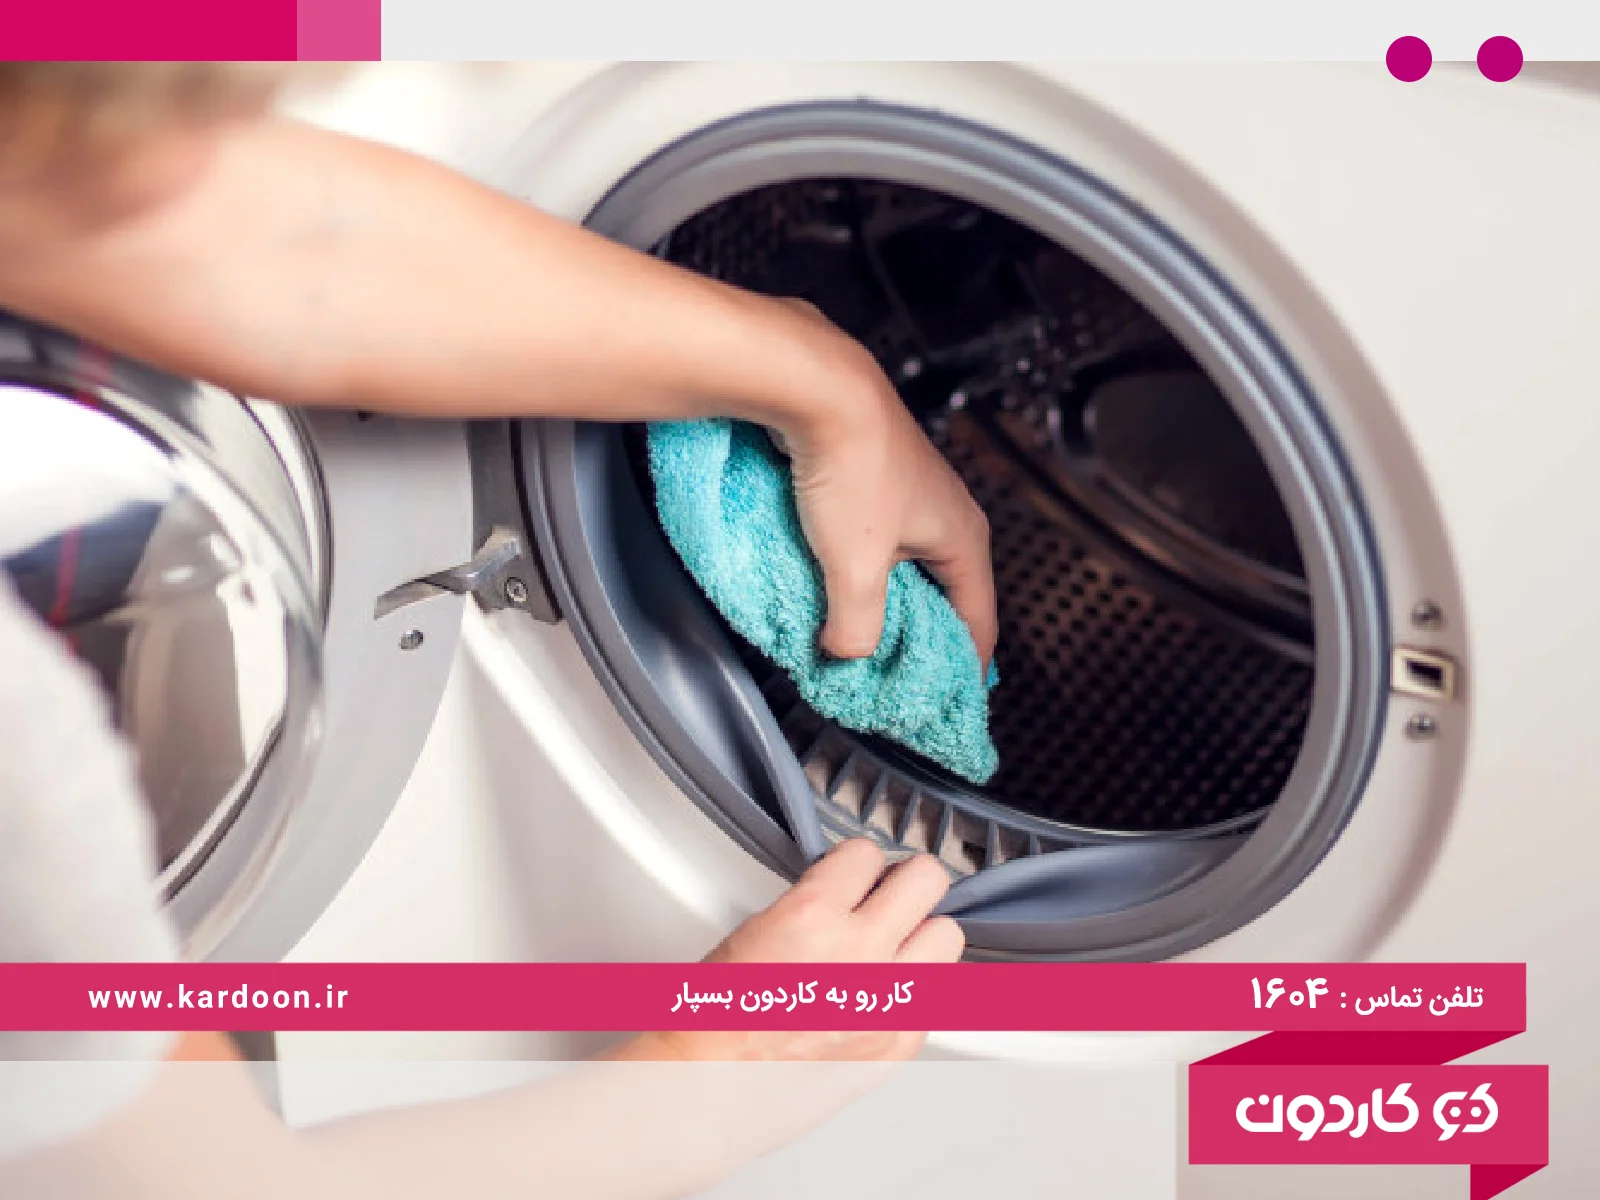 How to clean the tires of the washing machine